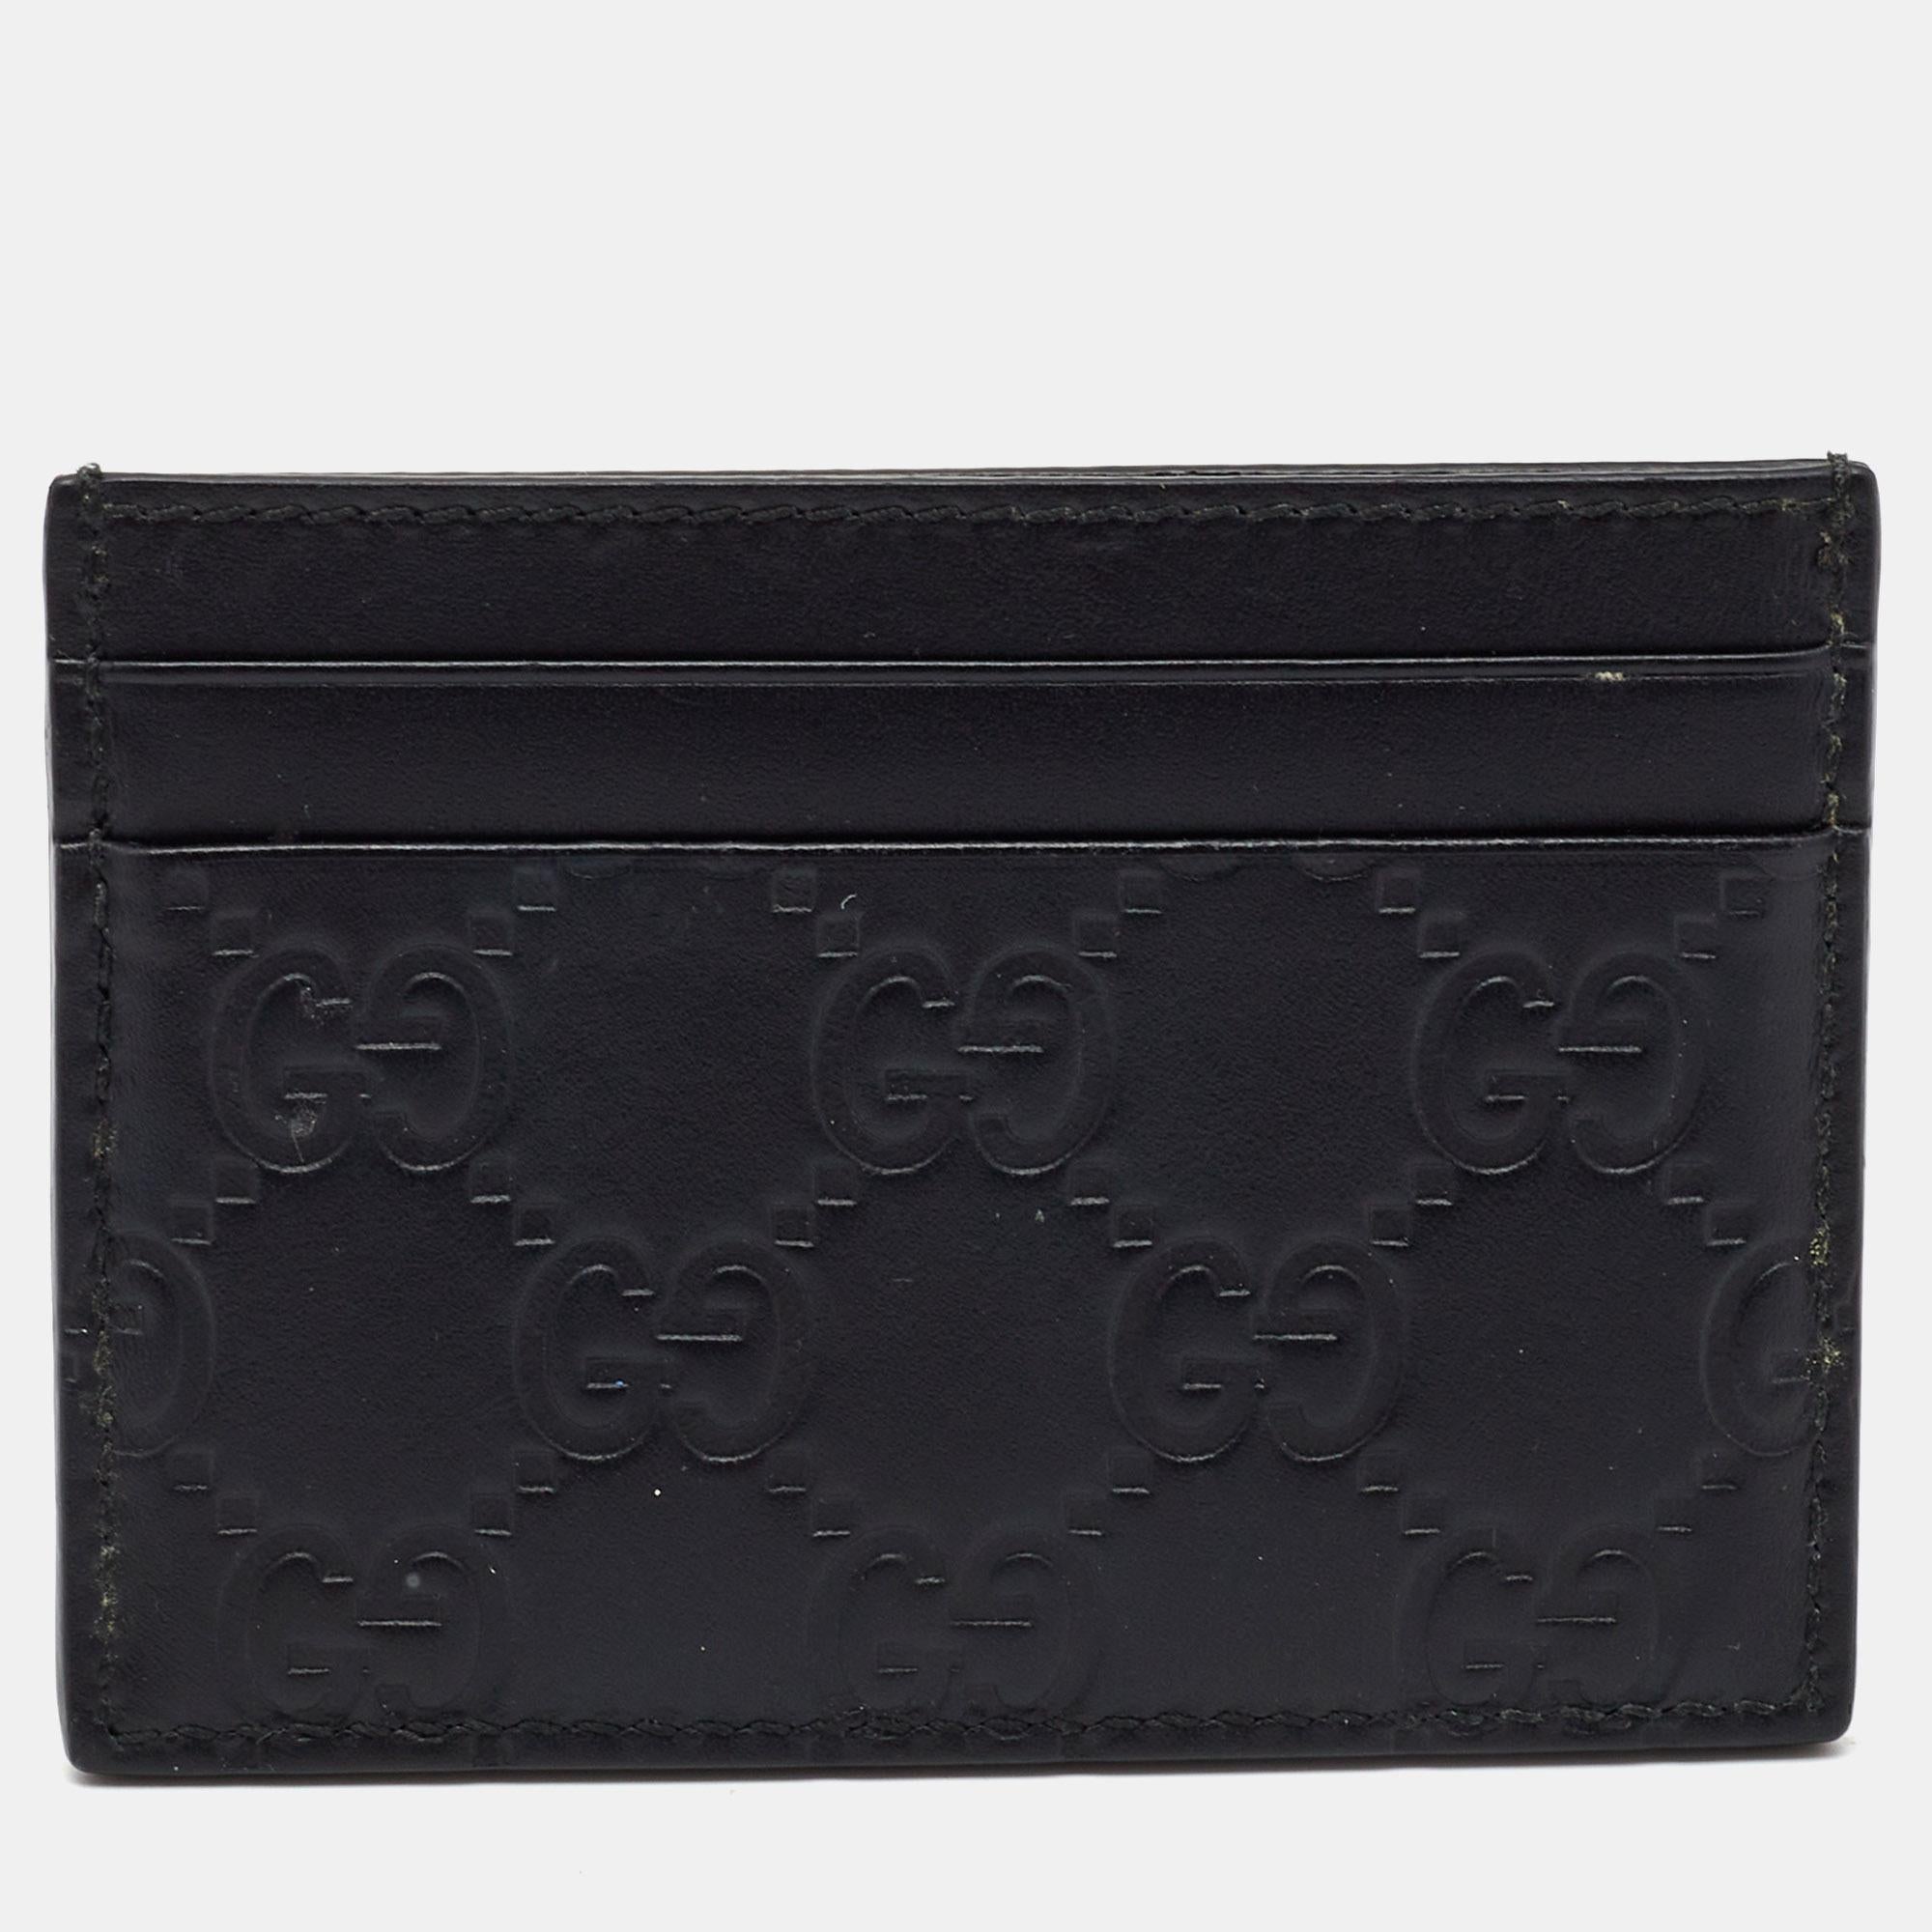 This stylish and functional cardholder is a must-have accessory. It is equipped with multiple, well-lined slots to hold your cards.

Includes: Original Dustbag, Info Booklet, Invoice

